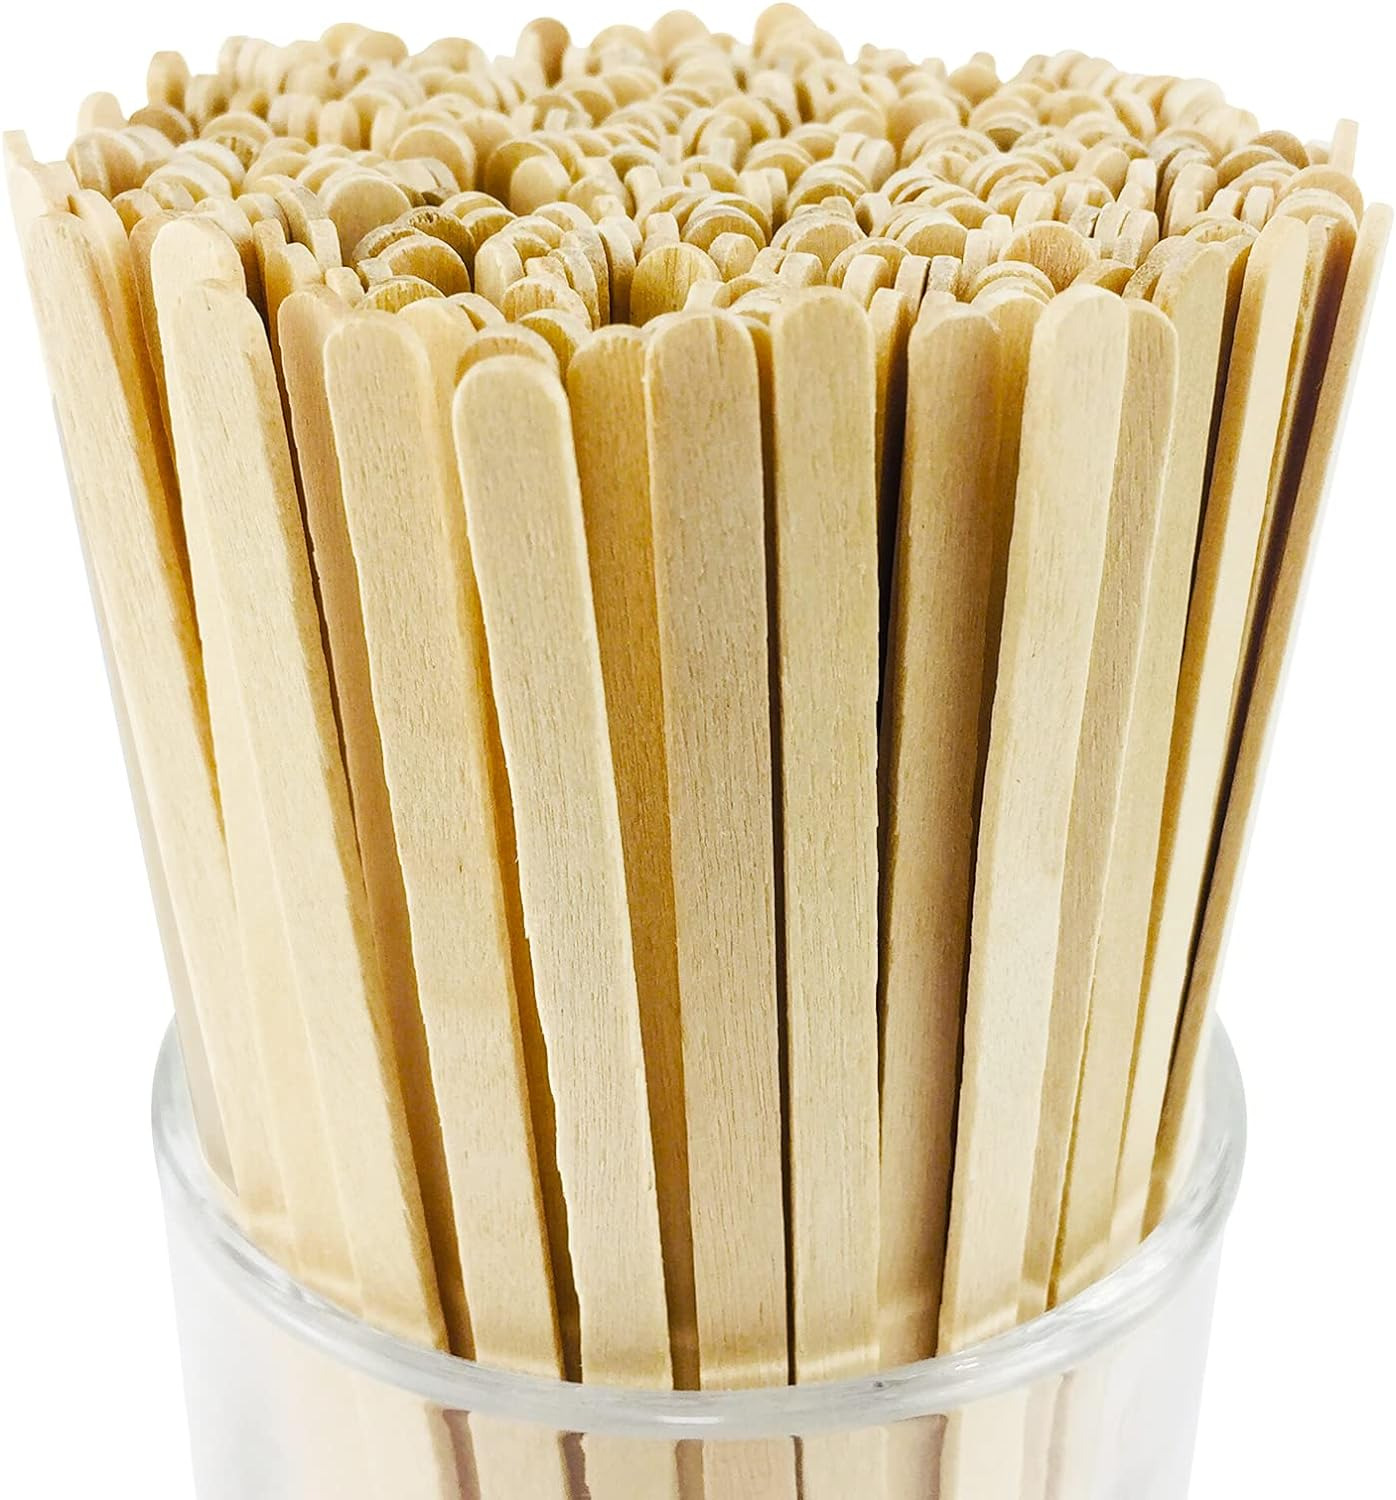 500Pcs Wooden Coffee Stir Sticks,Disposable Coffee Stirrers,5.5 Inches 